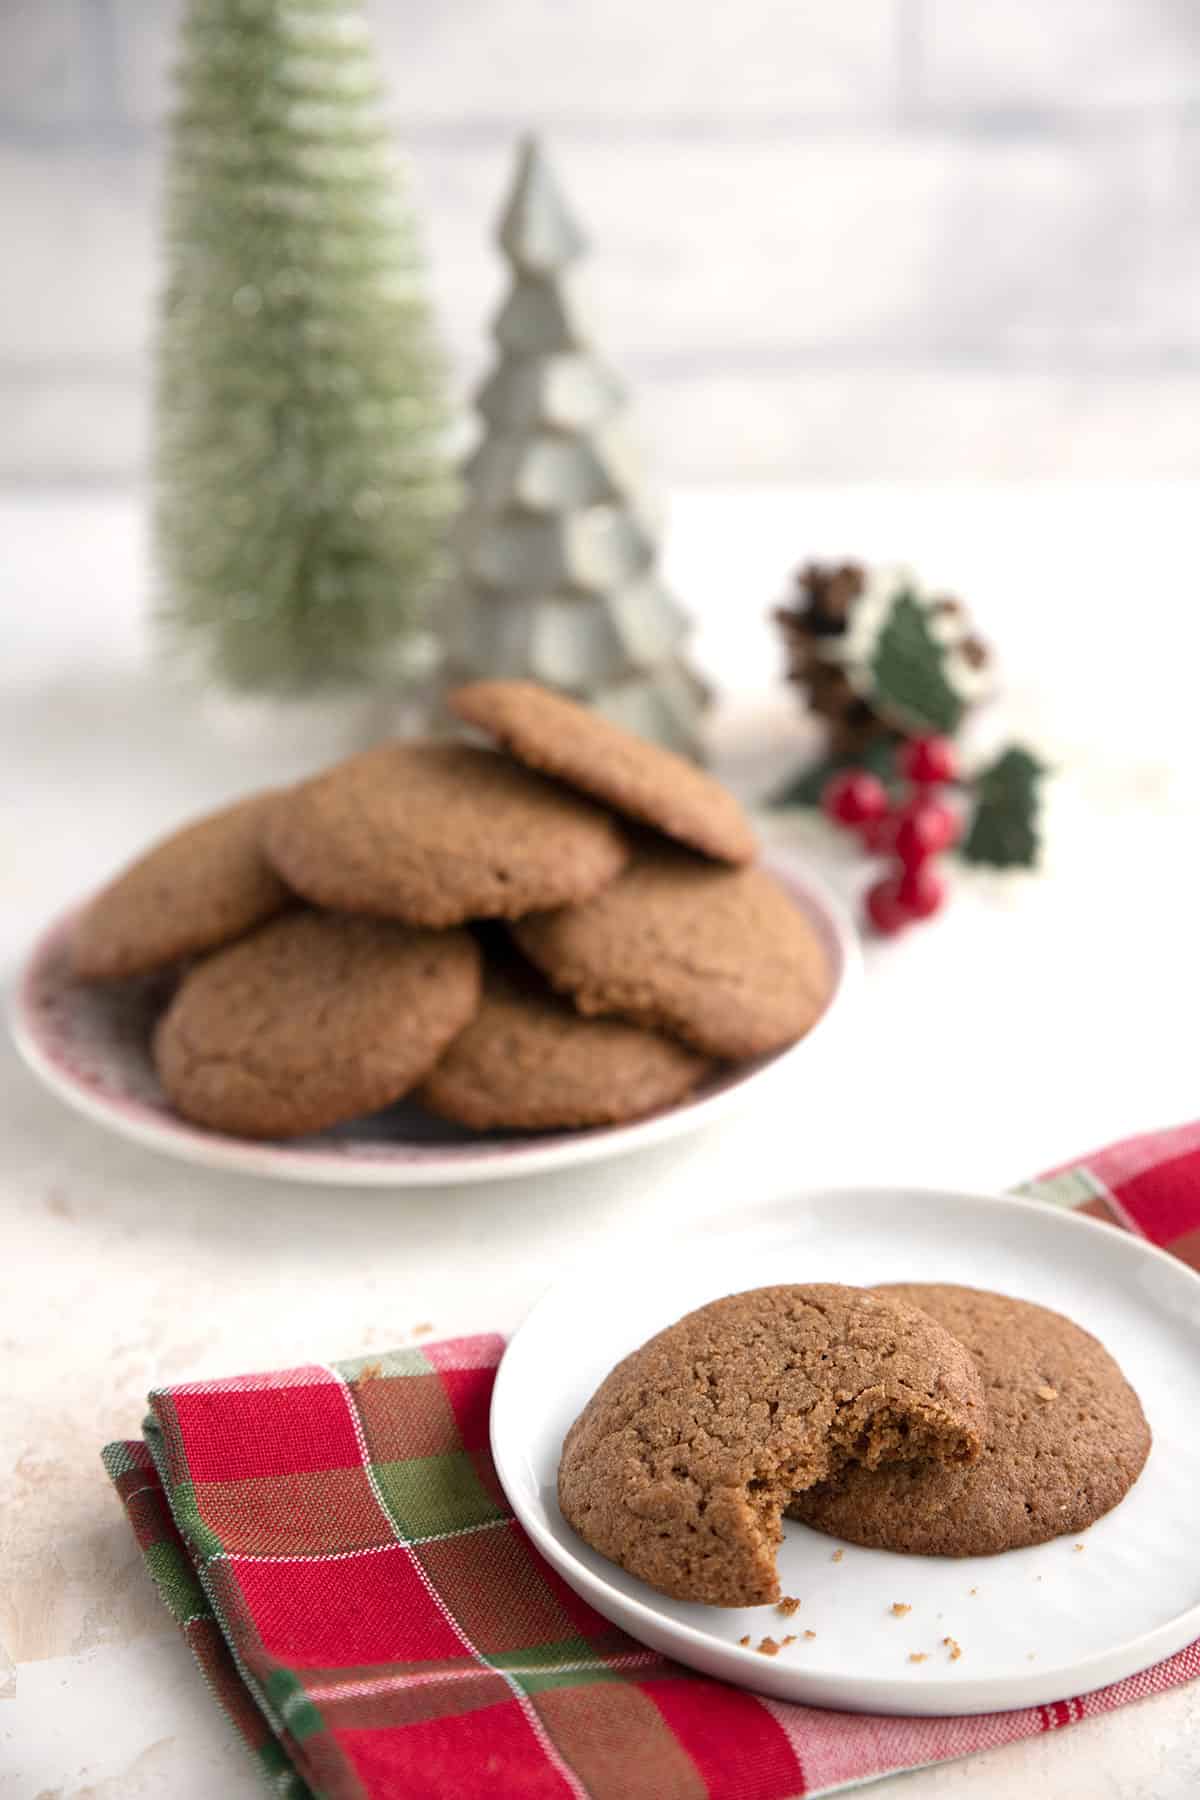 Two keto ginger molasses cookies on a white plate in front of more cookies and some holiday decor.